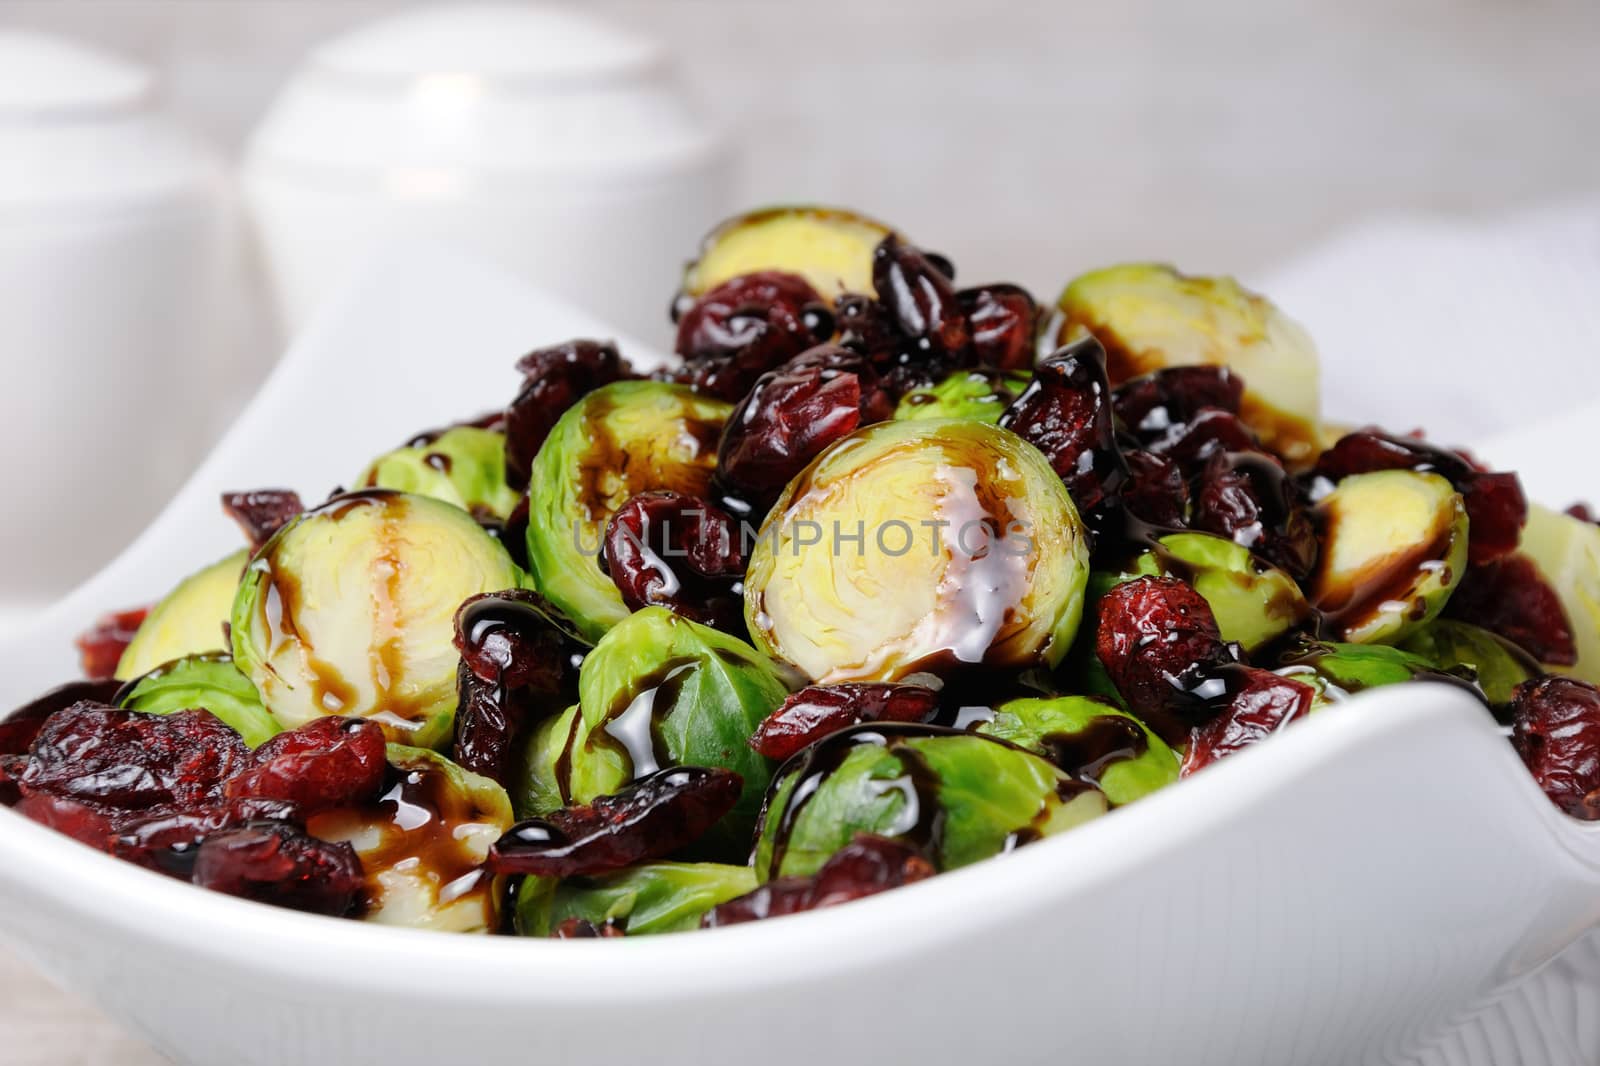 Salad from Brussels sprouts by Apolonia